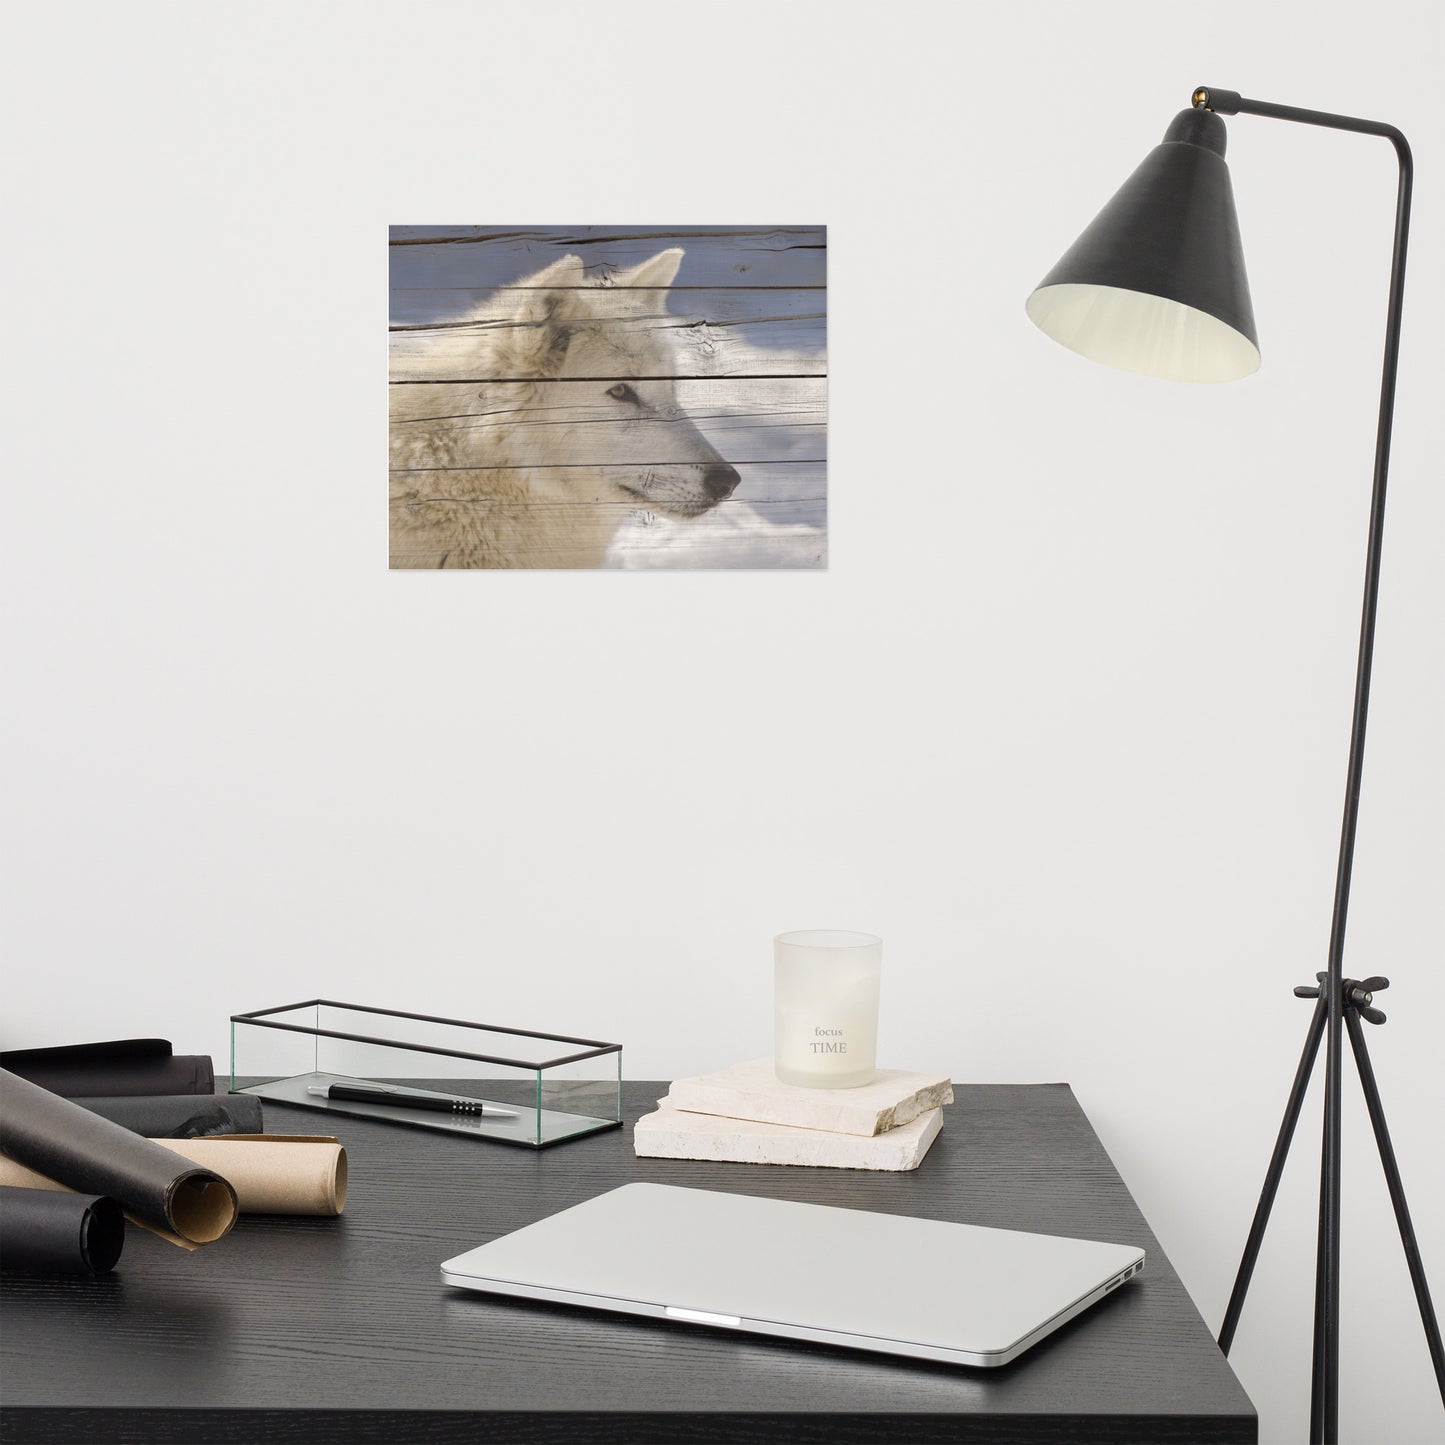 Farmhouse Office Wall Art: Aries the White Wolf Portrait on Faux Weathered Wood Texture - Farmhouse / Country Style / Modern Wildlife / Animal Photographic Artwork